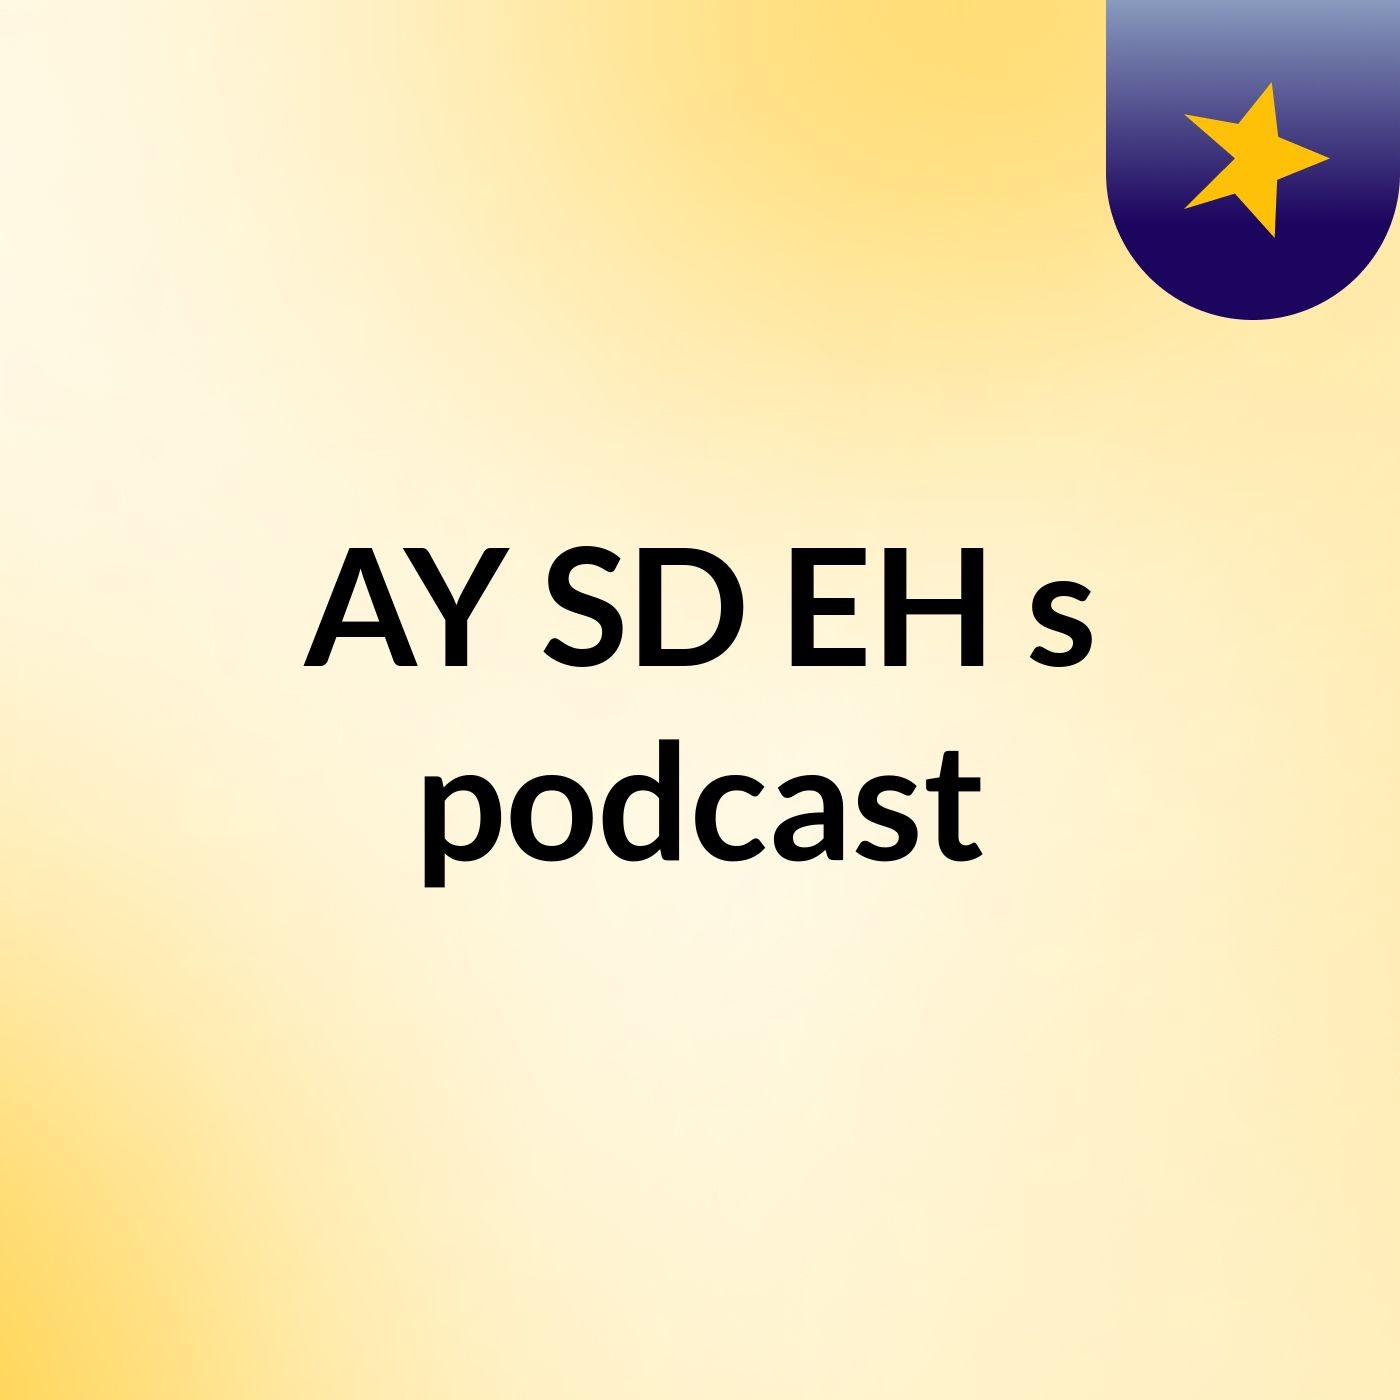 Episode 2 - AY SD EH's podcast